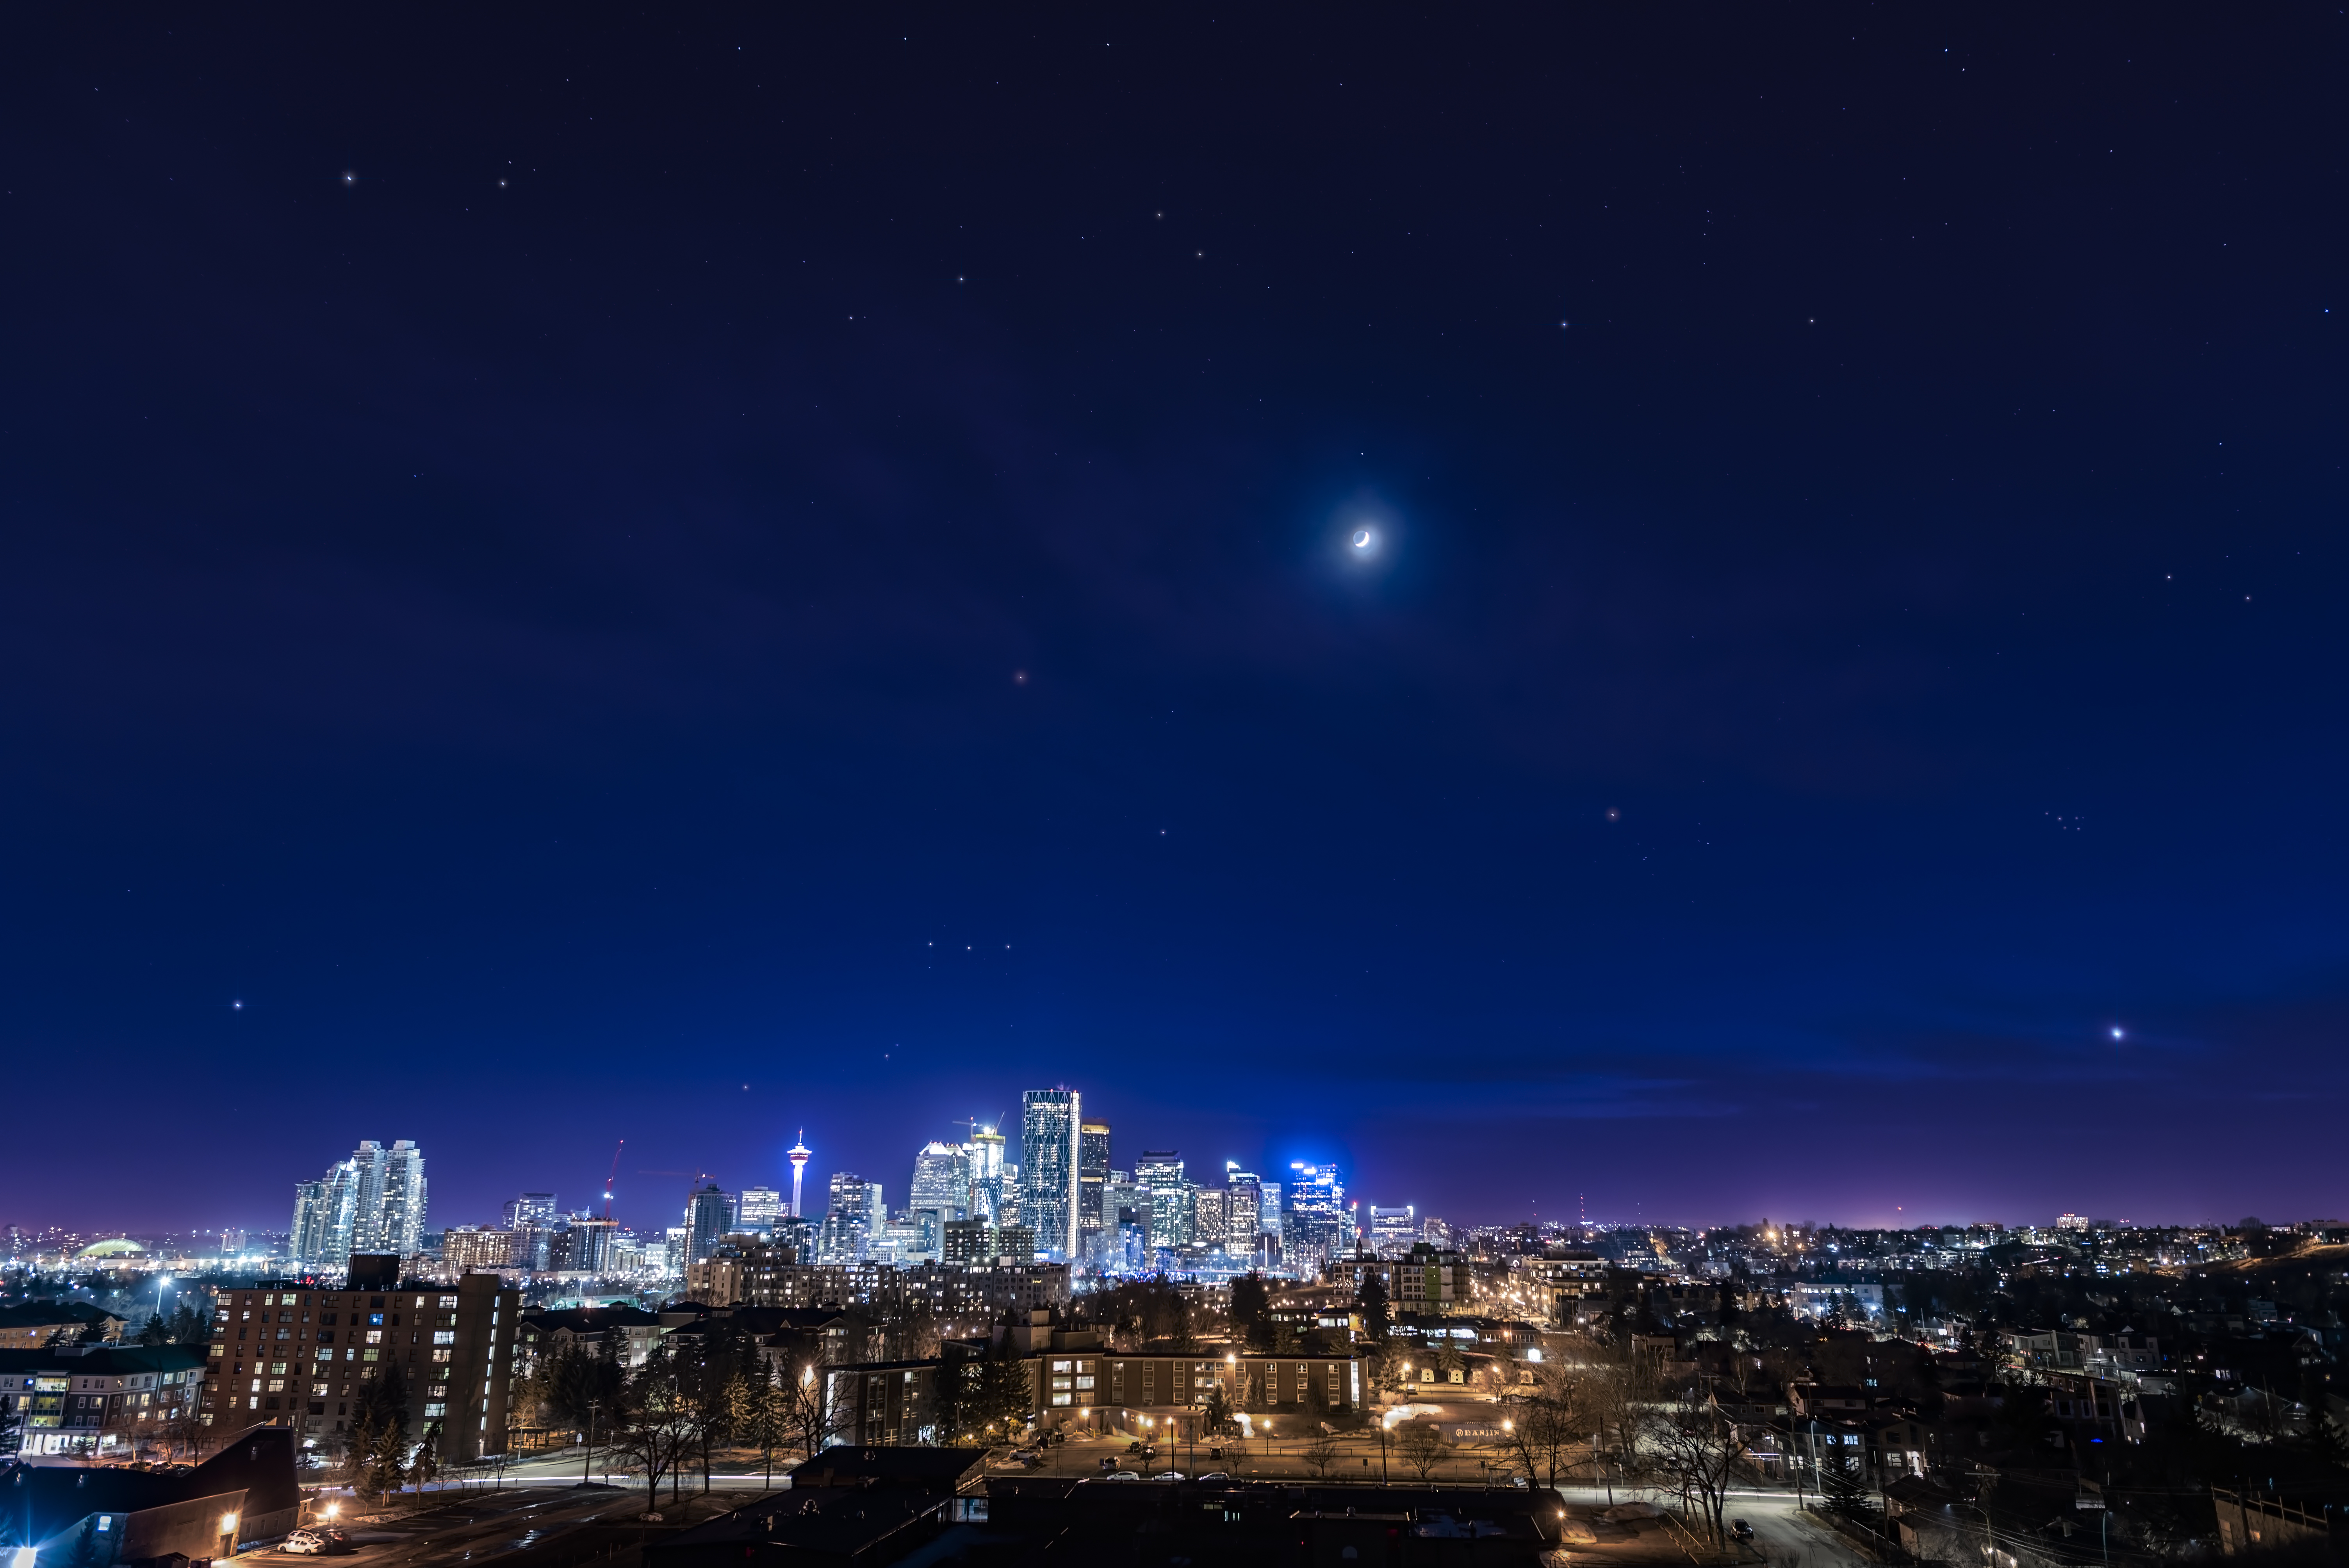 Venus (lower right), the Moon (center top), and a few bright stars — including those of the Pleiades and Orion — appear above the city of Calgary, Alberta, 
in this composite image meant to mimic how the human eye saw the scene. Even so, the photographer notes the camera picked up a few more stars than were visible to the naked eye. The image is a stack of four 2-second exposures with a 24mm Sigma Art lens at f/2.8 and Nikon D750 at ISO 400. No light-pollution filter was used. The Moon comprises an HDR blend of shorter images to prevent overexposure. 